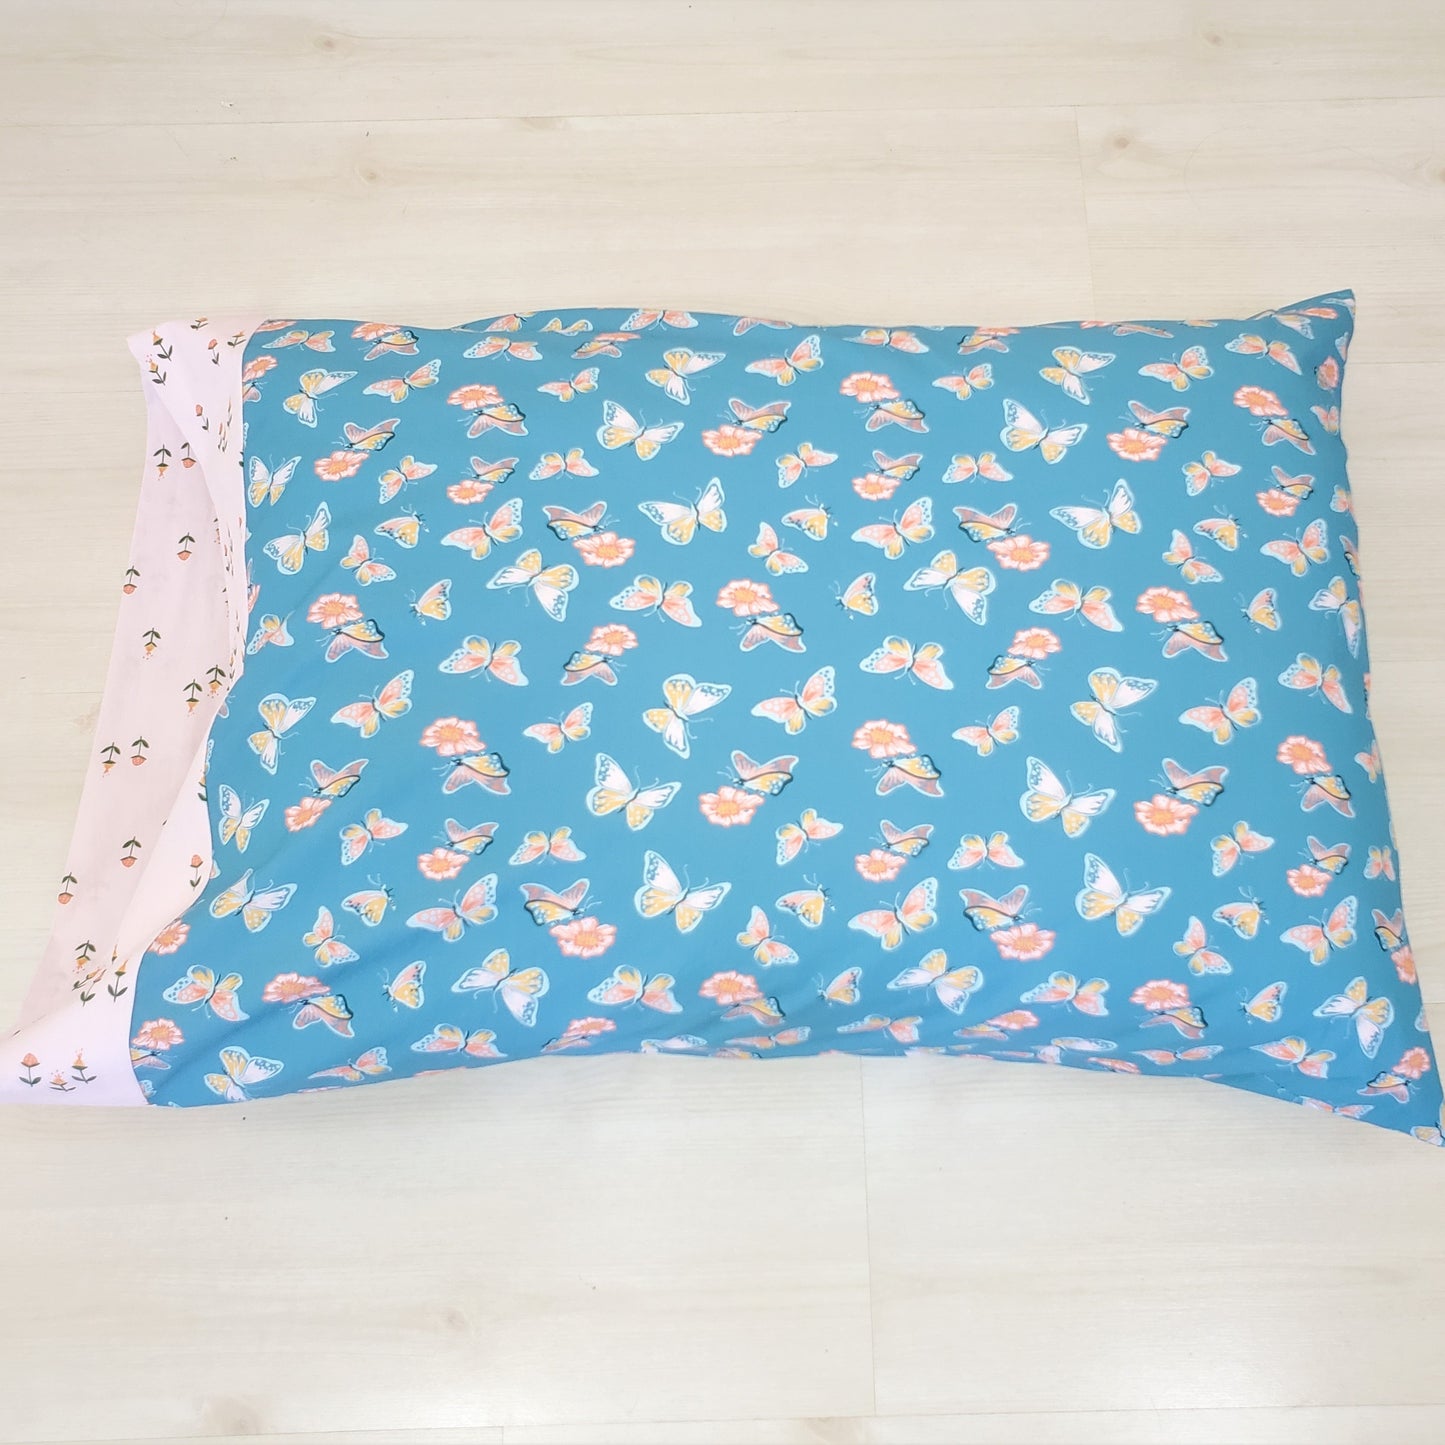 Organic Cotton Pillowcases in Butterfly Print